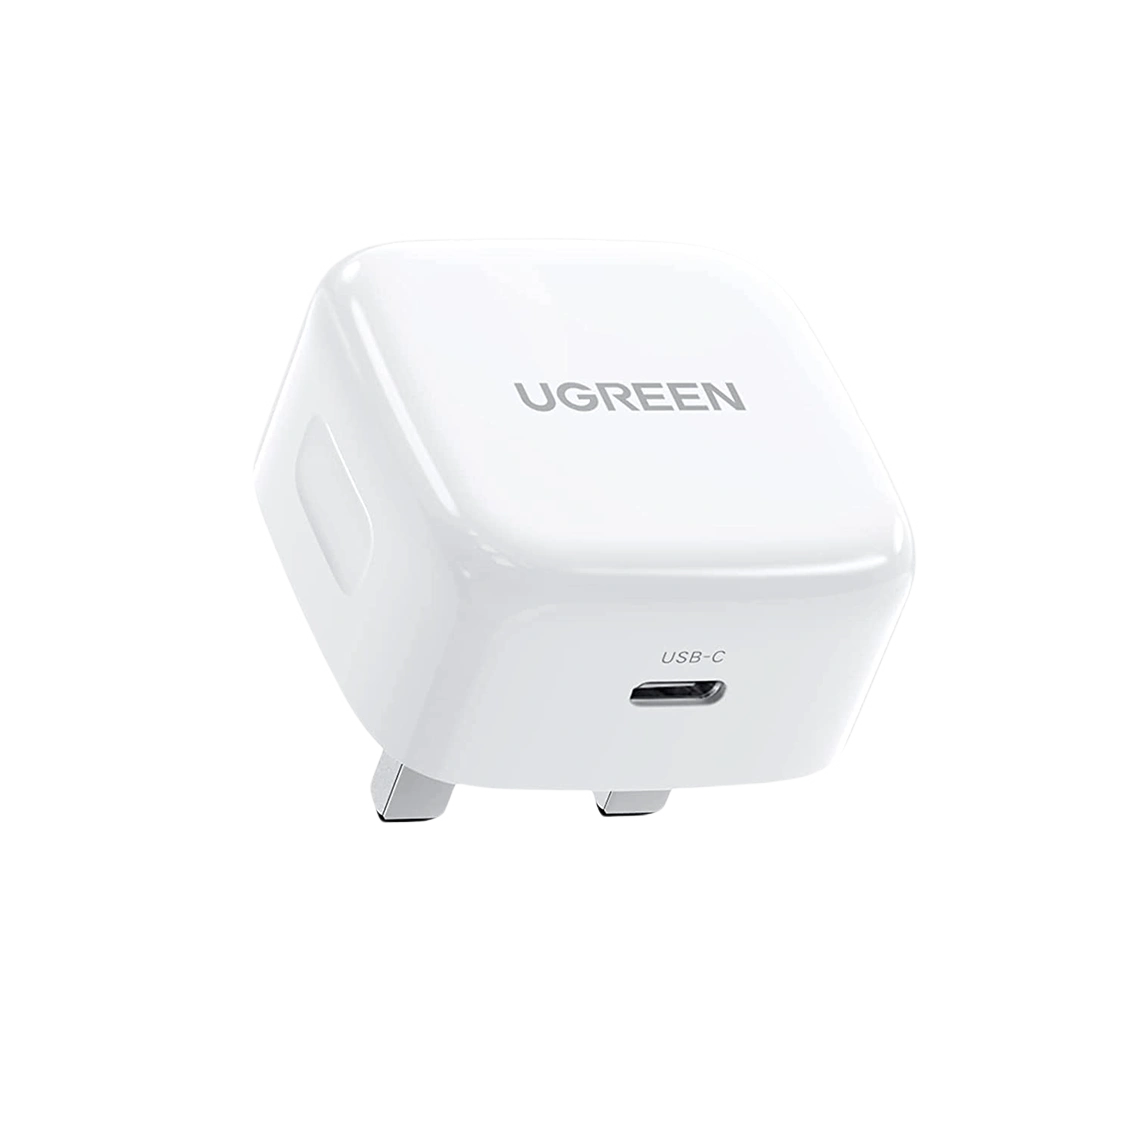 UGREEN USB-C 18W PD Charger CD137